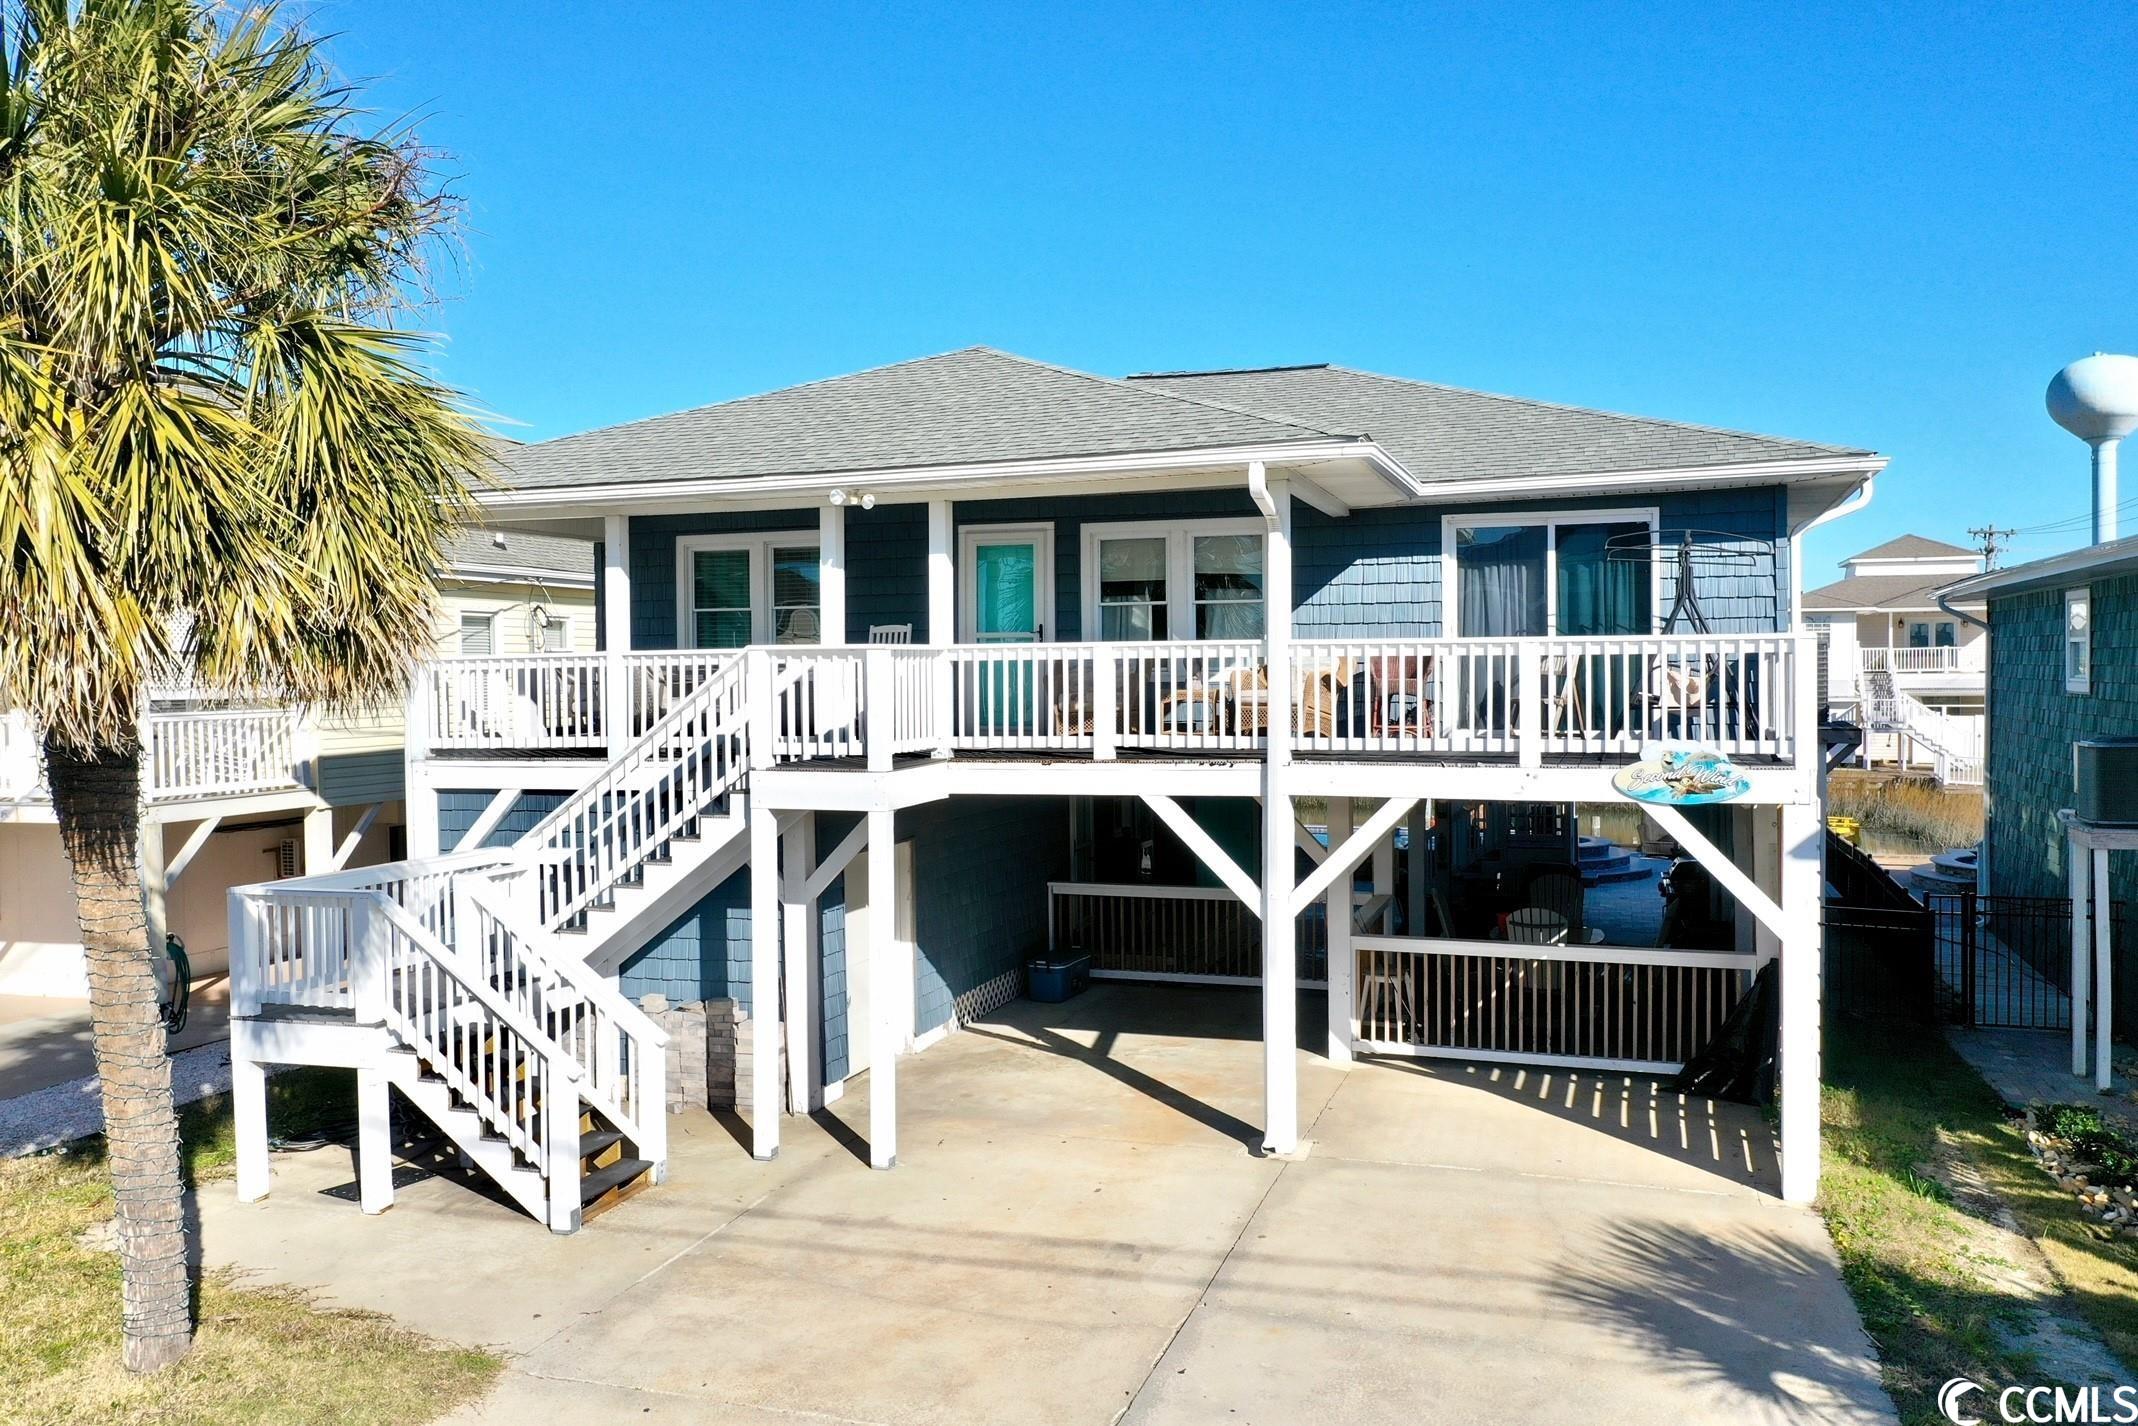 back on market! no fault to seller! beautifully updated and furnished beach home, just 1 block from the beach! this home is located in the channels of cherry grove, which is a section of north myrtle beach, sc. the layout of this home is 3 bedrooms and 2 full bathrooms upstairs, 2 bedrooms, 1 full bathroom, and a half bathroom downstairs. the 2 downstairs bedrooms are similar to "lock out units" each equipped with their own private entry and bathrooms. brand new saltwater pool, that can be heated or cooled. along with a fenced in yard and a floating dock! there is laundry and an outdoor shower downstairs for your convenience! plenty of room for entertainment! this raised beach home is ideal for several purposes such as, rental property, family vacation home, or a wonderful primary residence where you could enjoy the beach life! buyer is responsible for all measurement verifications.